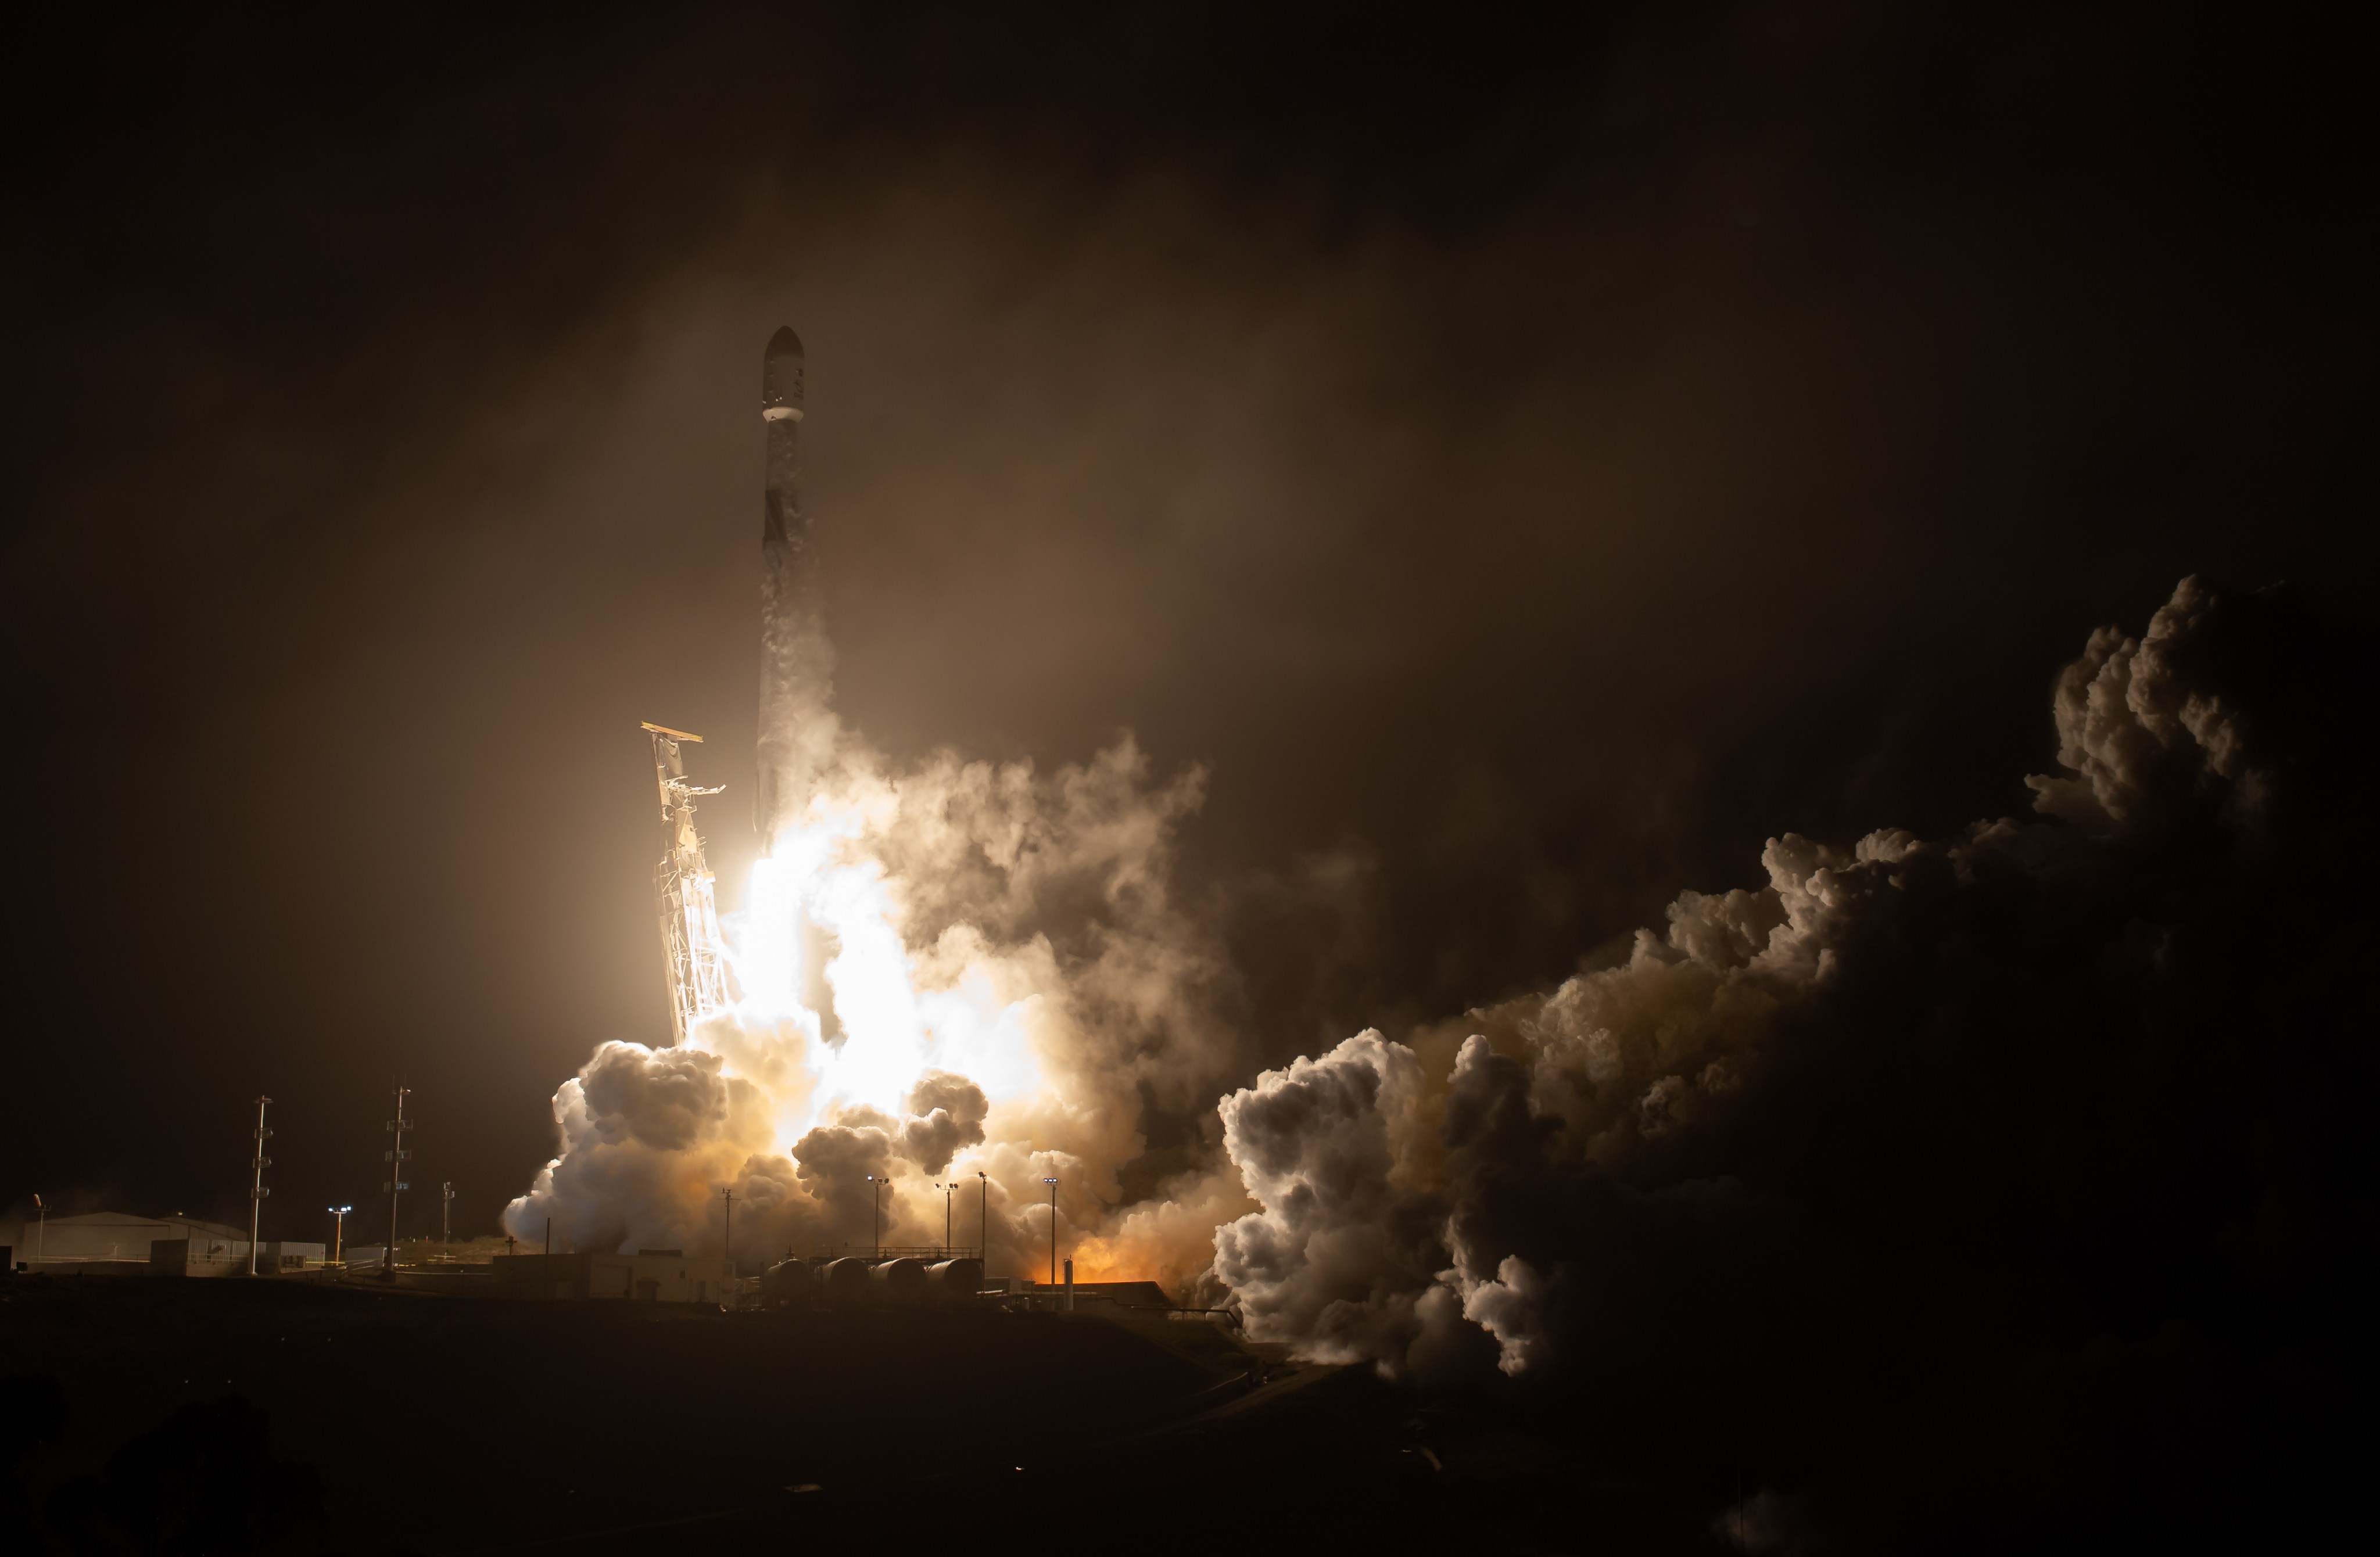 A SpaceX Falcon 9 rocket lifts off from Space Launch Complex 4 at Vandenberg Space Force Base in California on Nov. 24, 2021, carrying NASA&rsquo;s Double Asteroid Redirection Test (DART) spacecraft. Liftoff was at 1:21 a.m. EST.